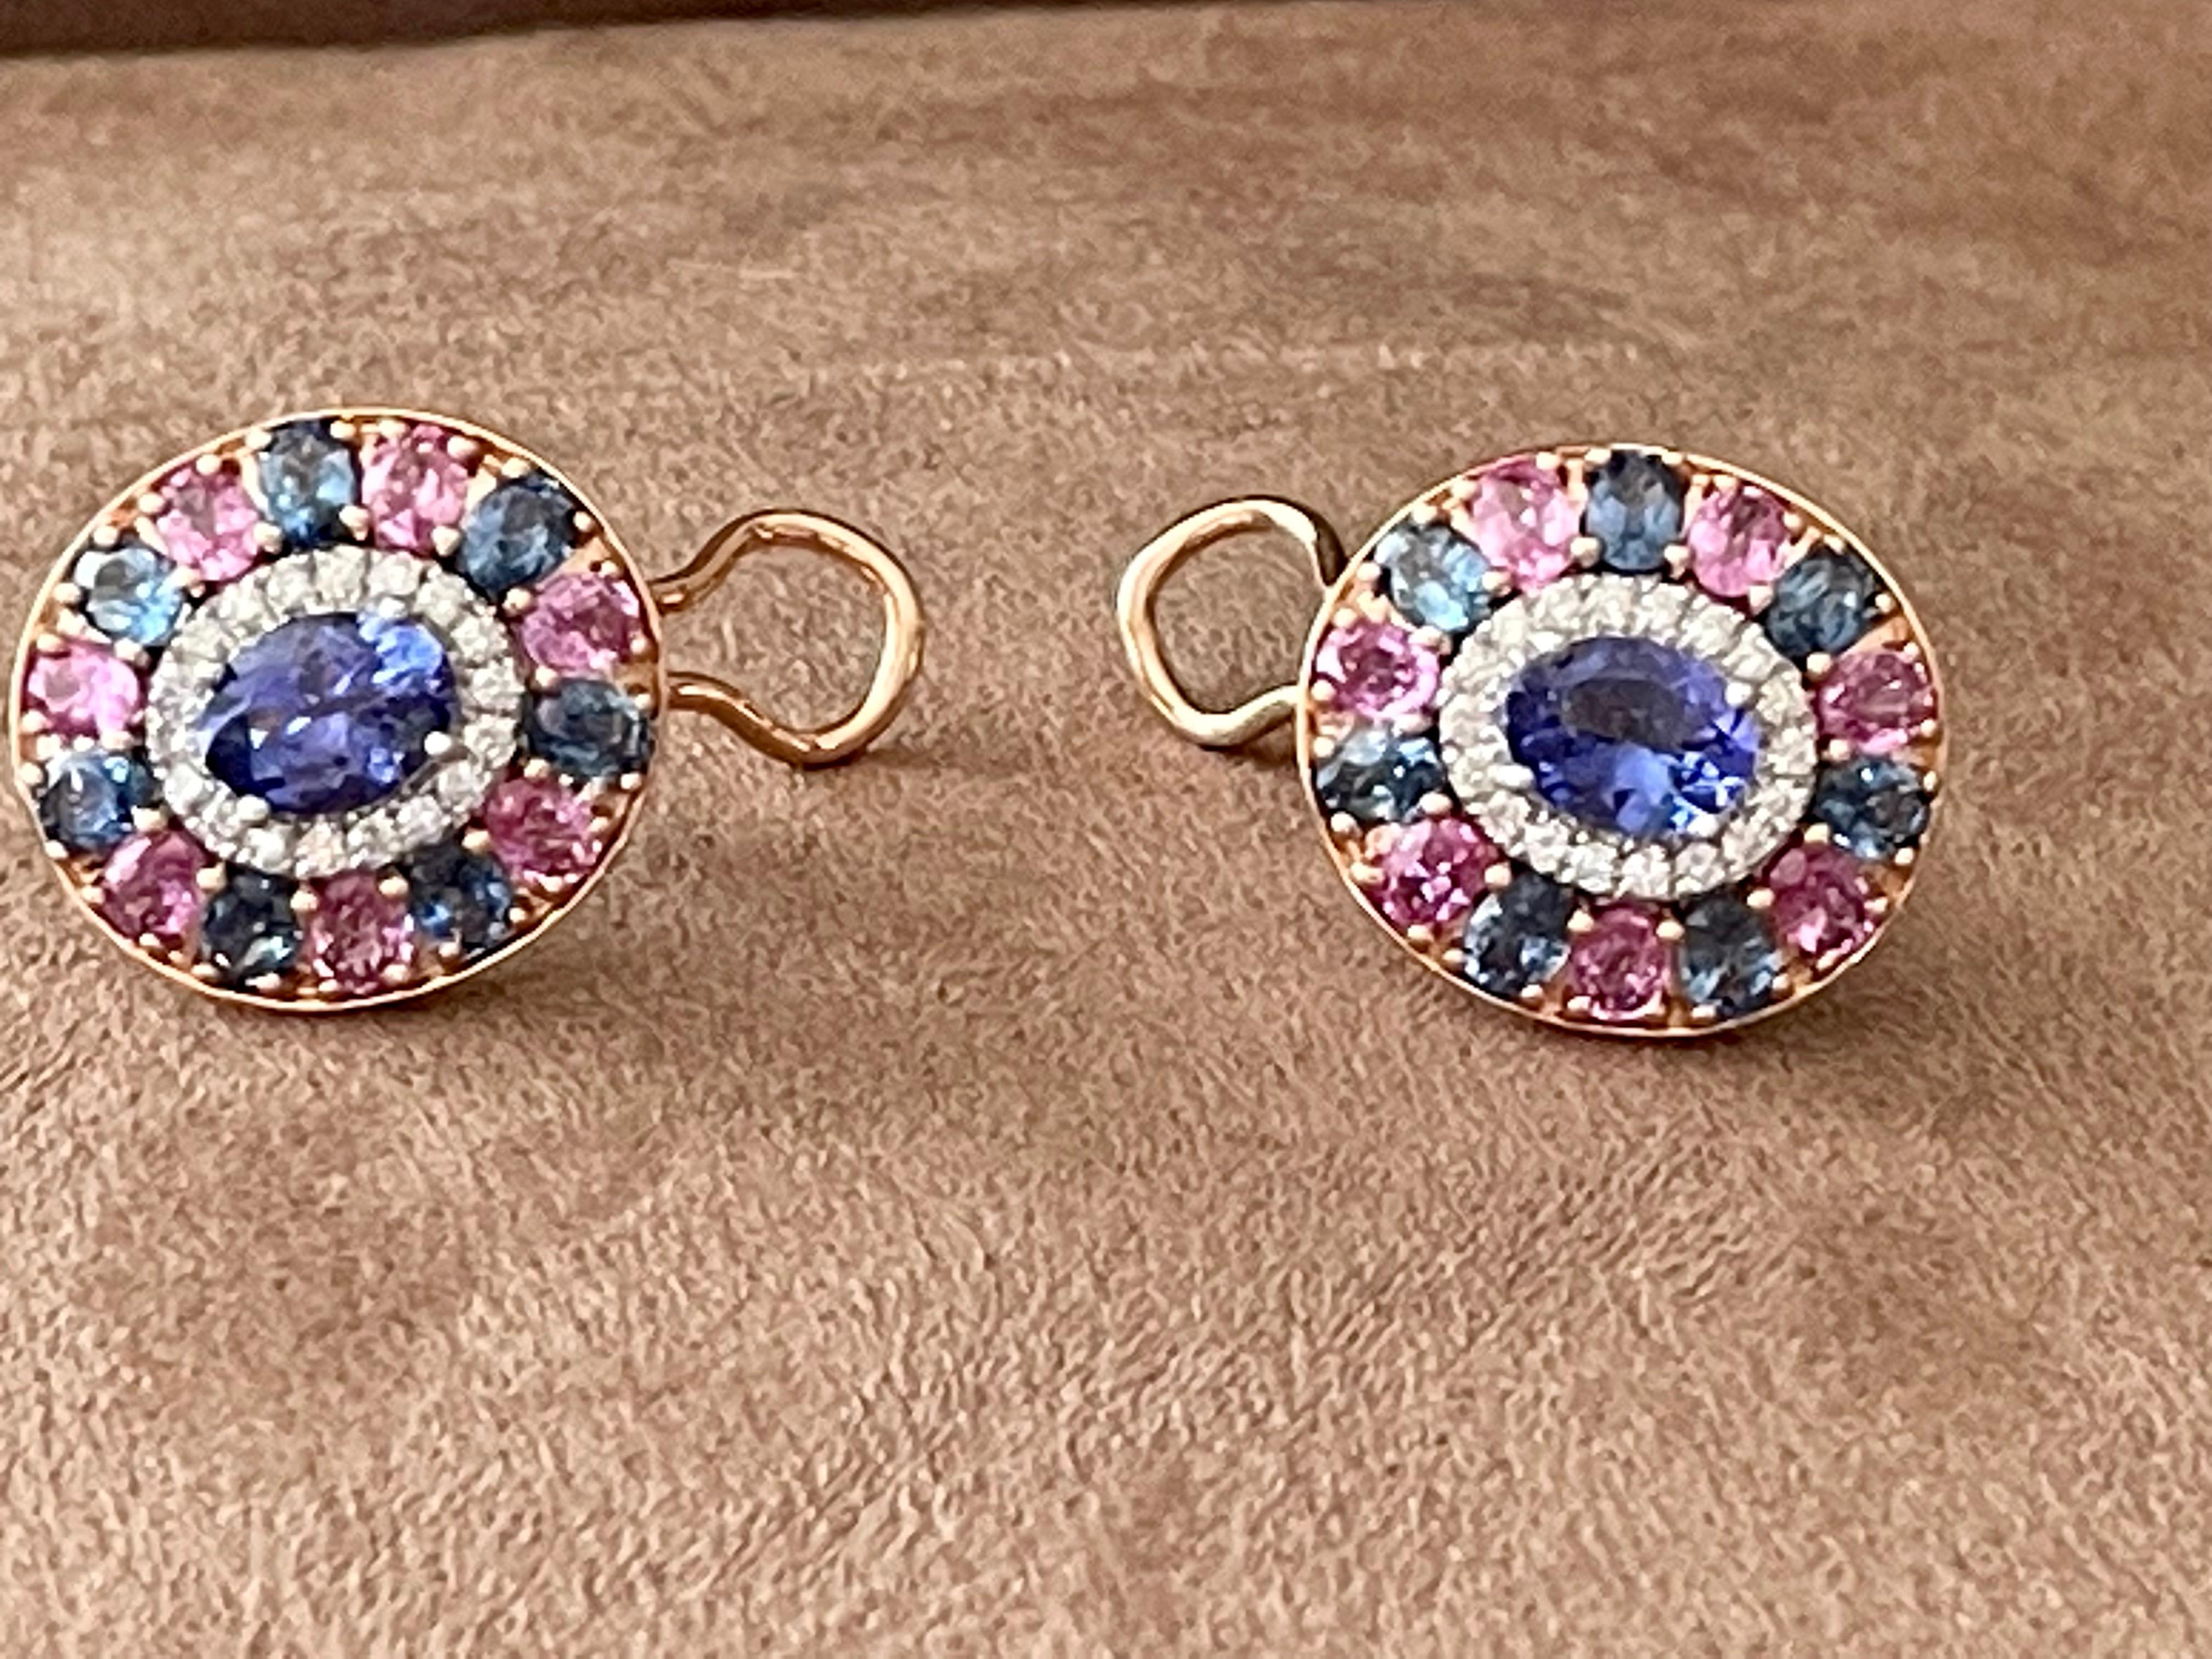 Contemporary 18k Rose Gold Cluster Earrings Tanzanite Pink Sappire Blue Sapphire Diamond For Sale